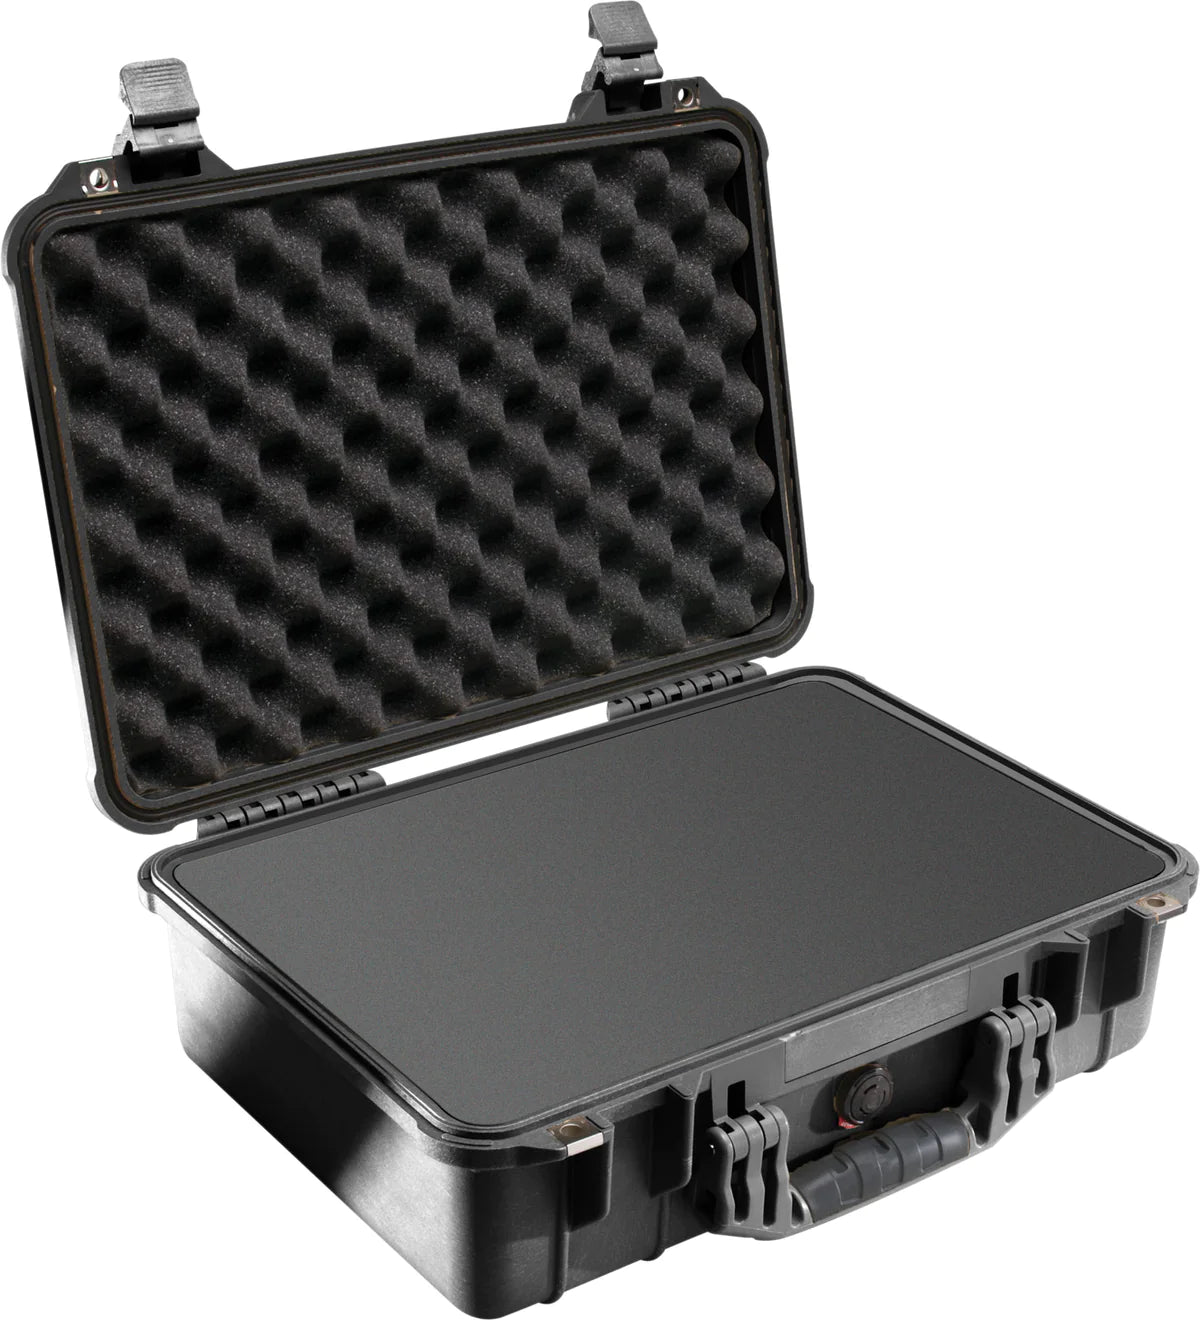 A crushproof Pelican 1500 Case on a white background.